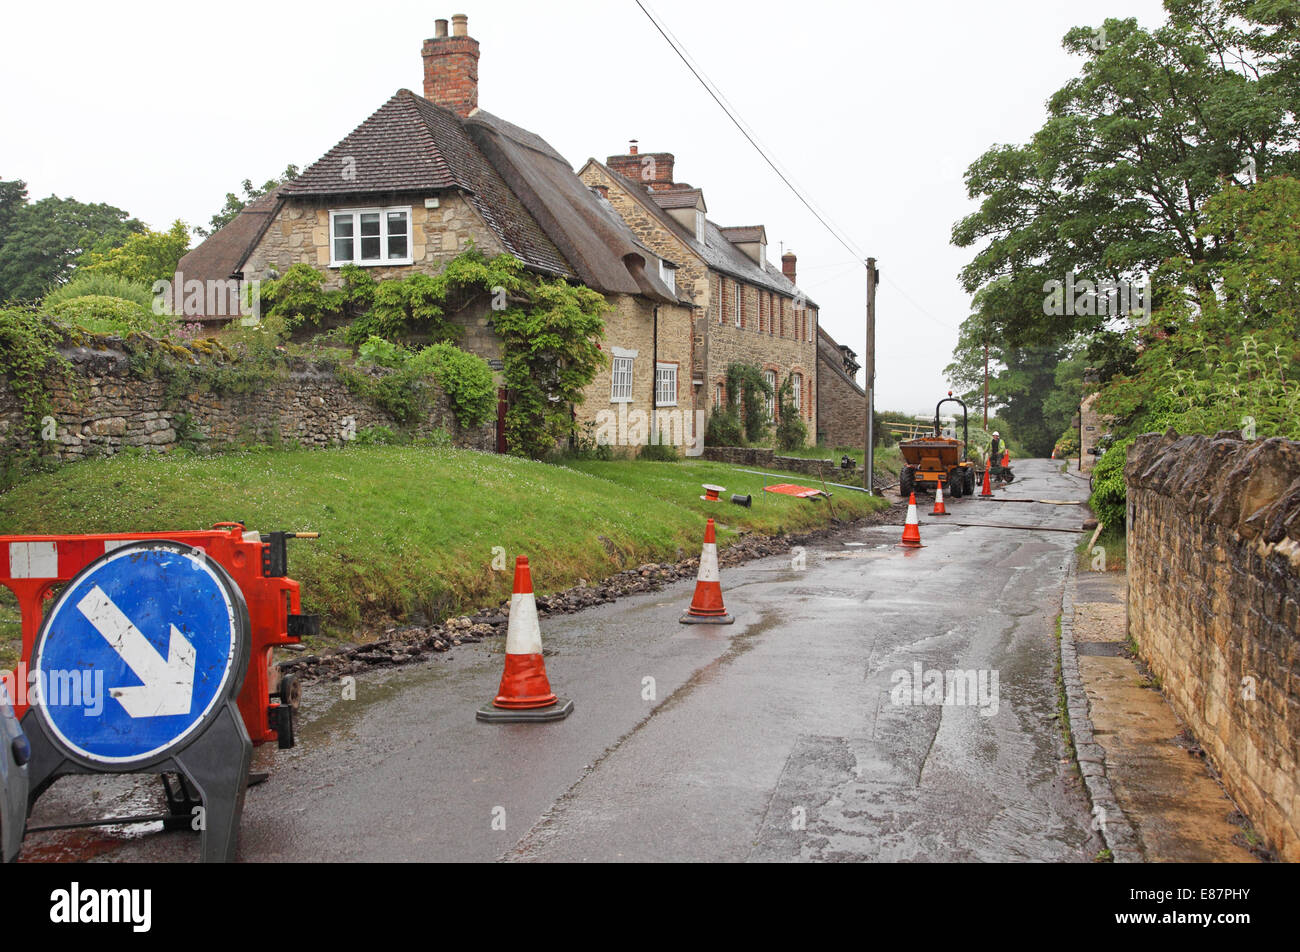 Cones divert traffic around works to install new fibre-optic broadband cables in a picturesque rural village in southern England Stock Photo